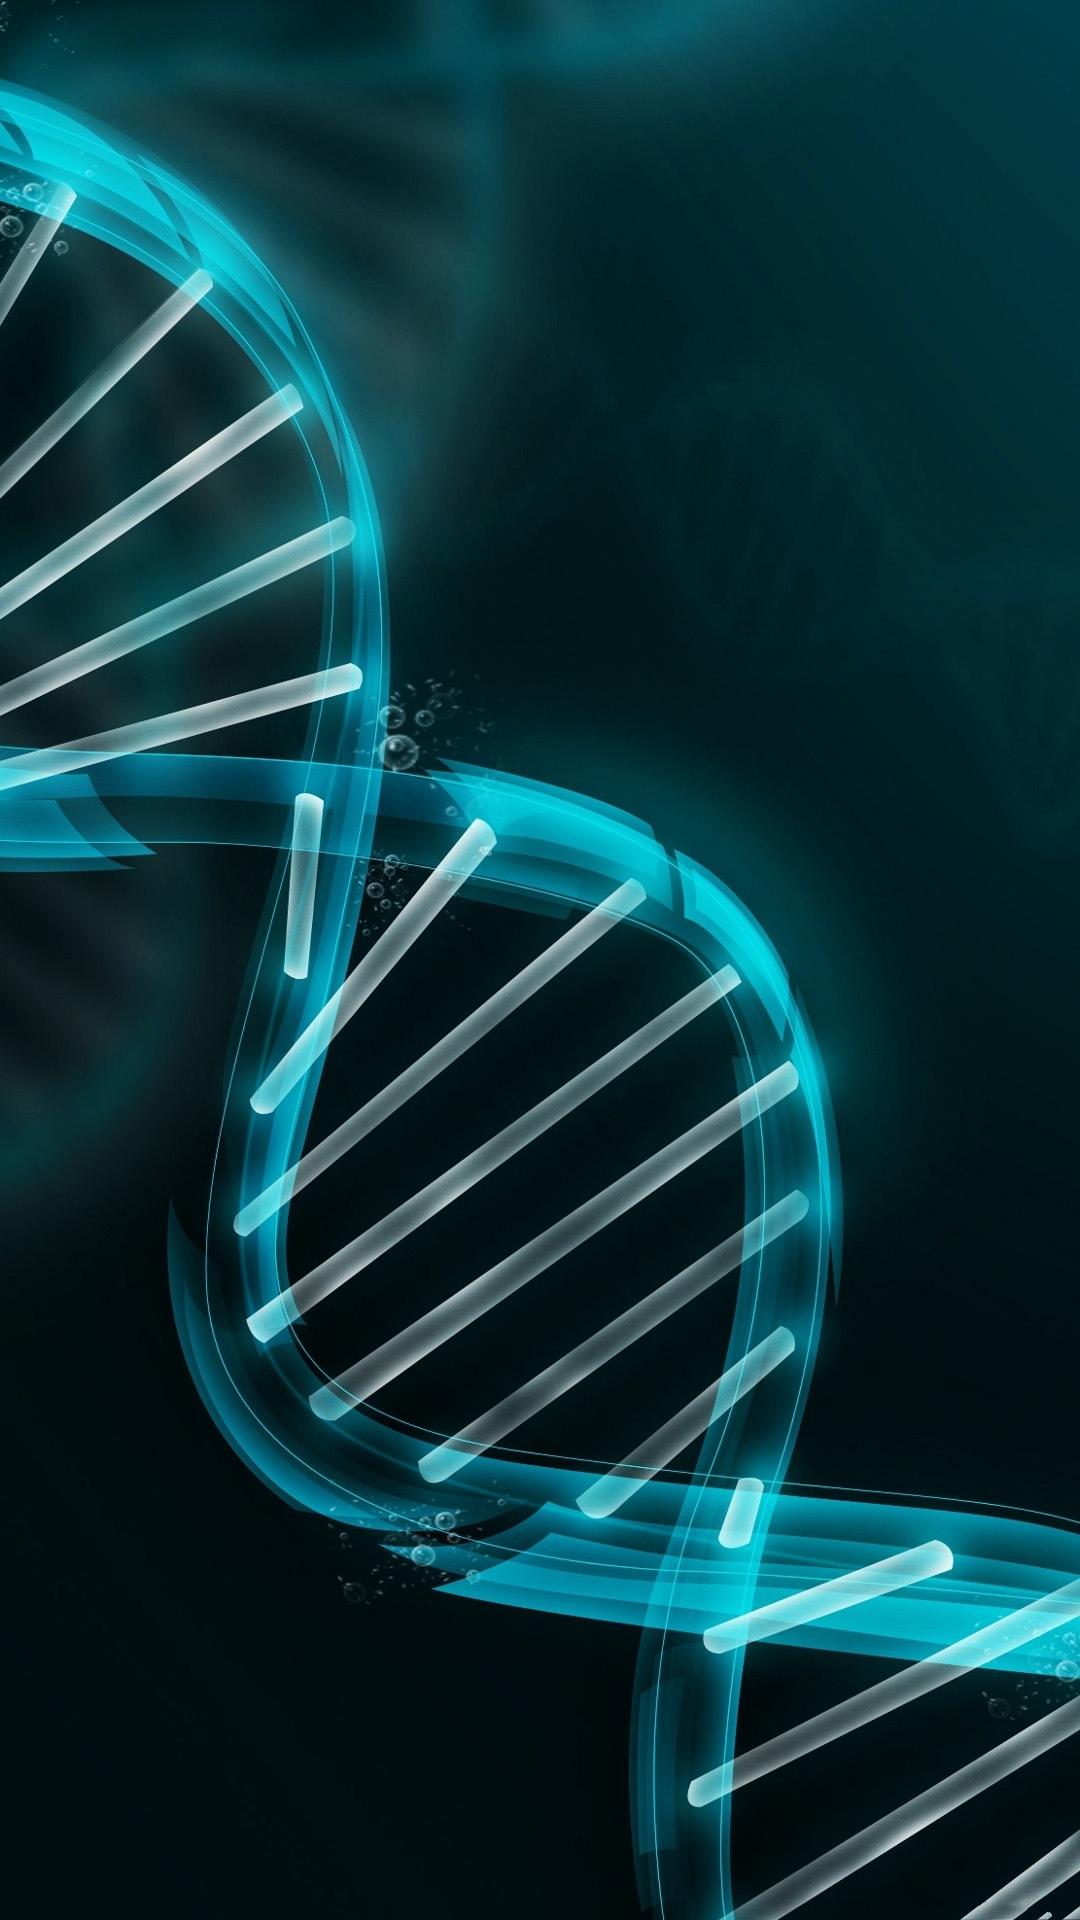 Free download DNA Strand Illustration iPhone 6 Plus HD